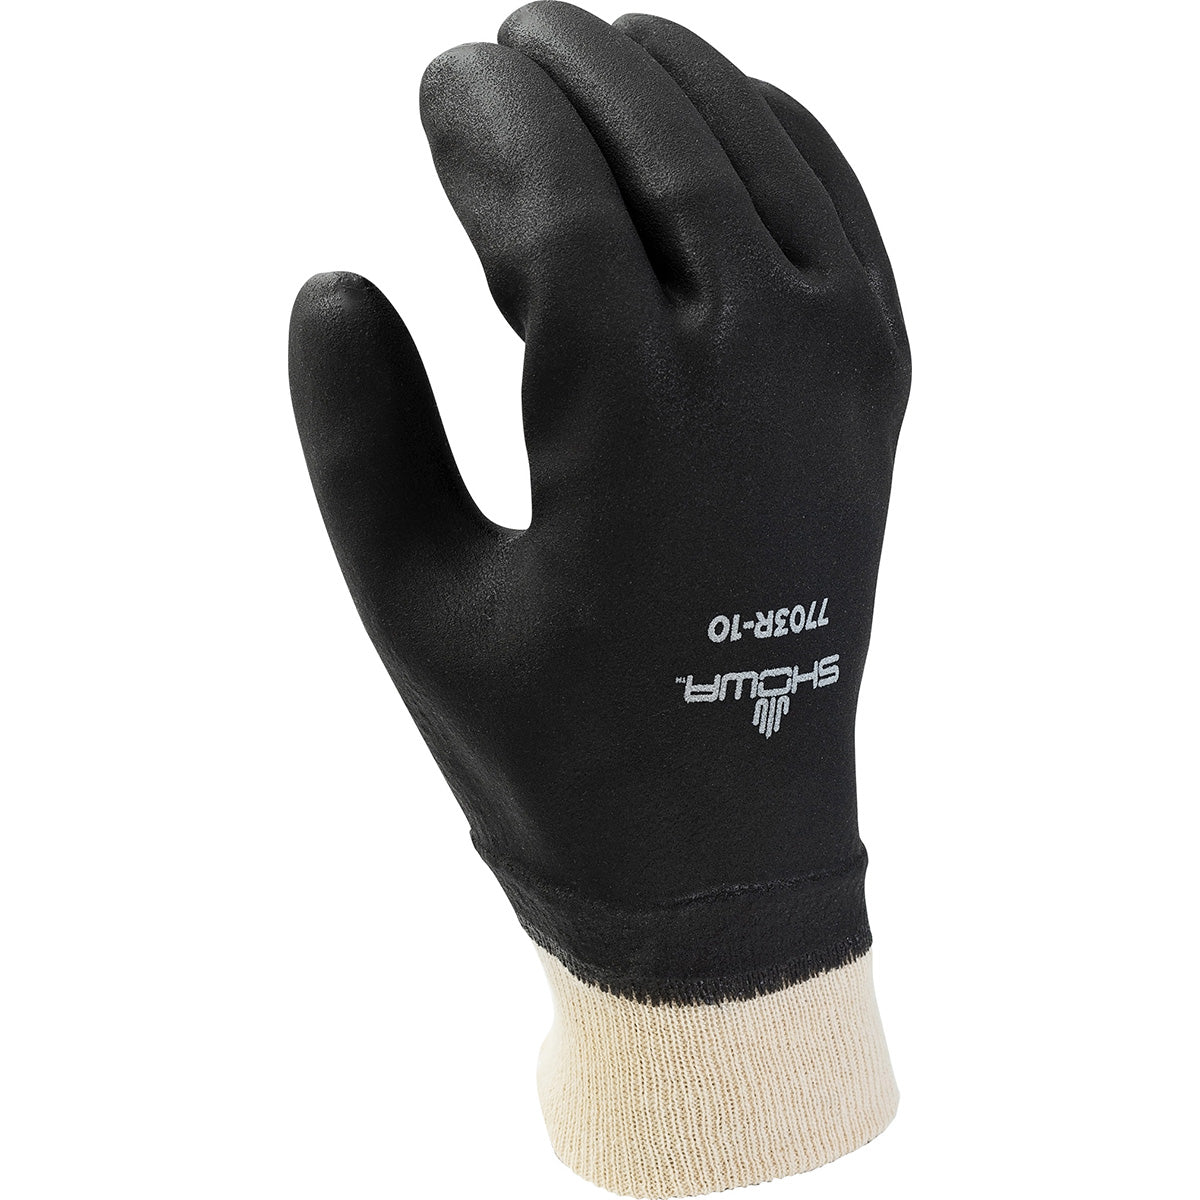 Showa 7703R PVC Coated Knit Wrist Rough Finish Work Glove (Pack of 12 Pairs) Work Gloves and Hats - Cleanflow